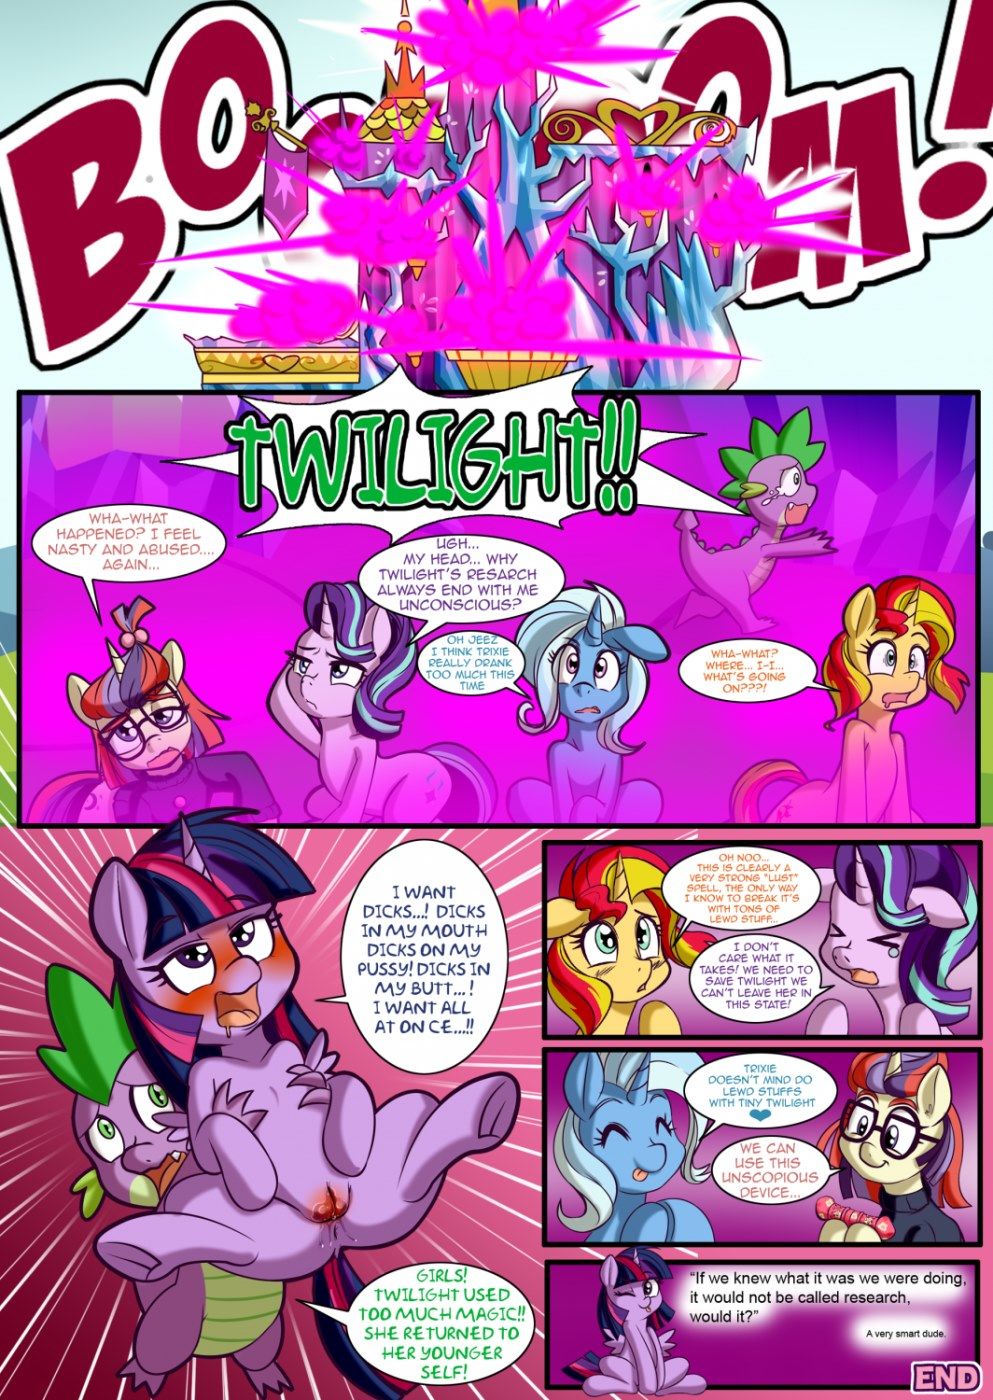 Back to Magic Kindergarten - Little Pony page 16